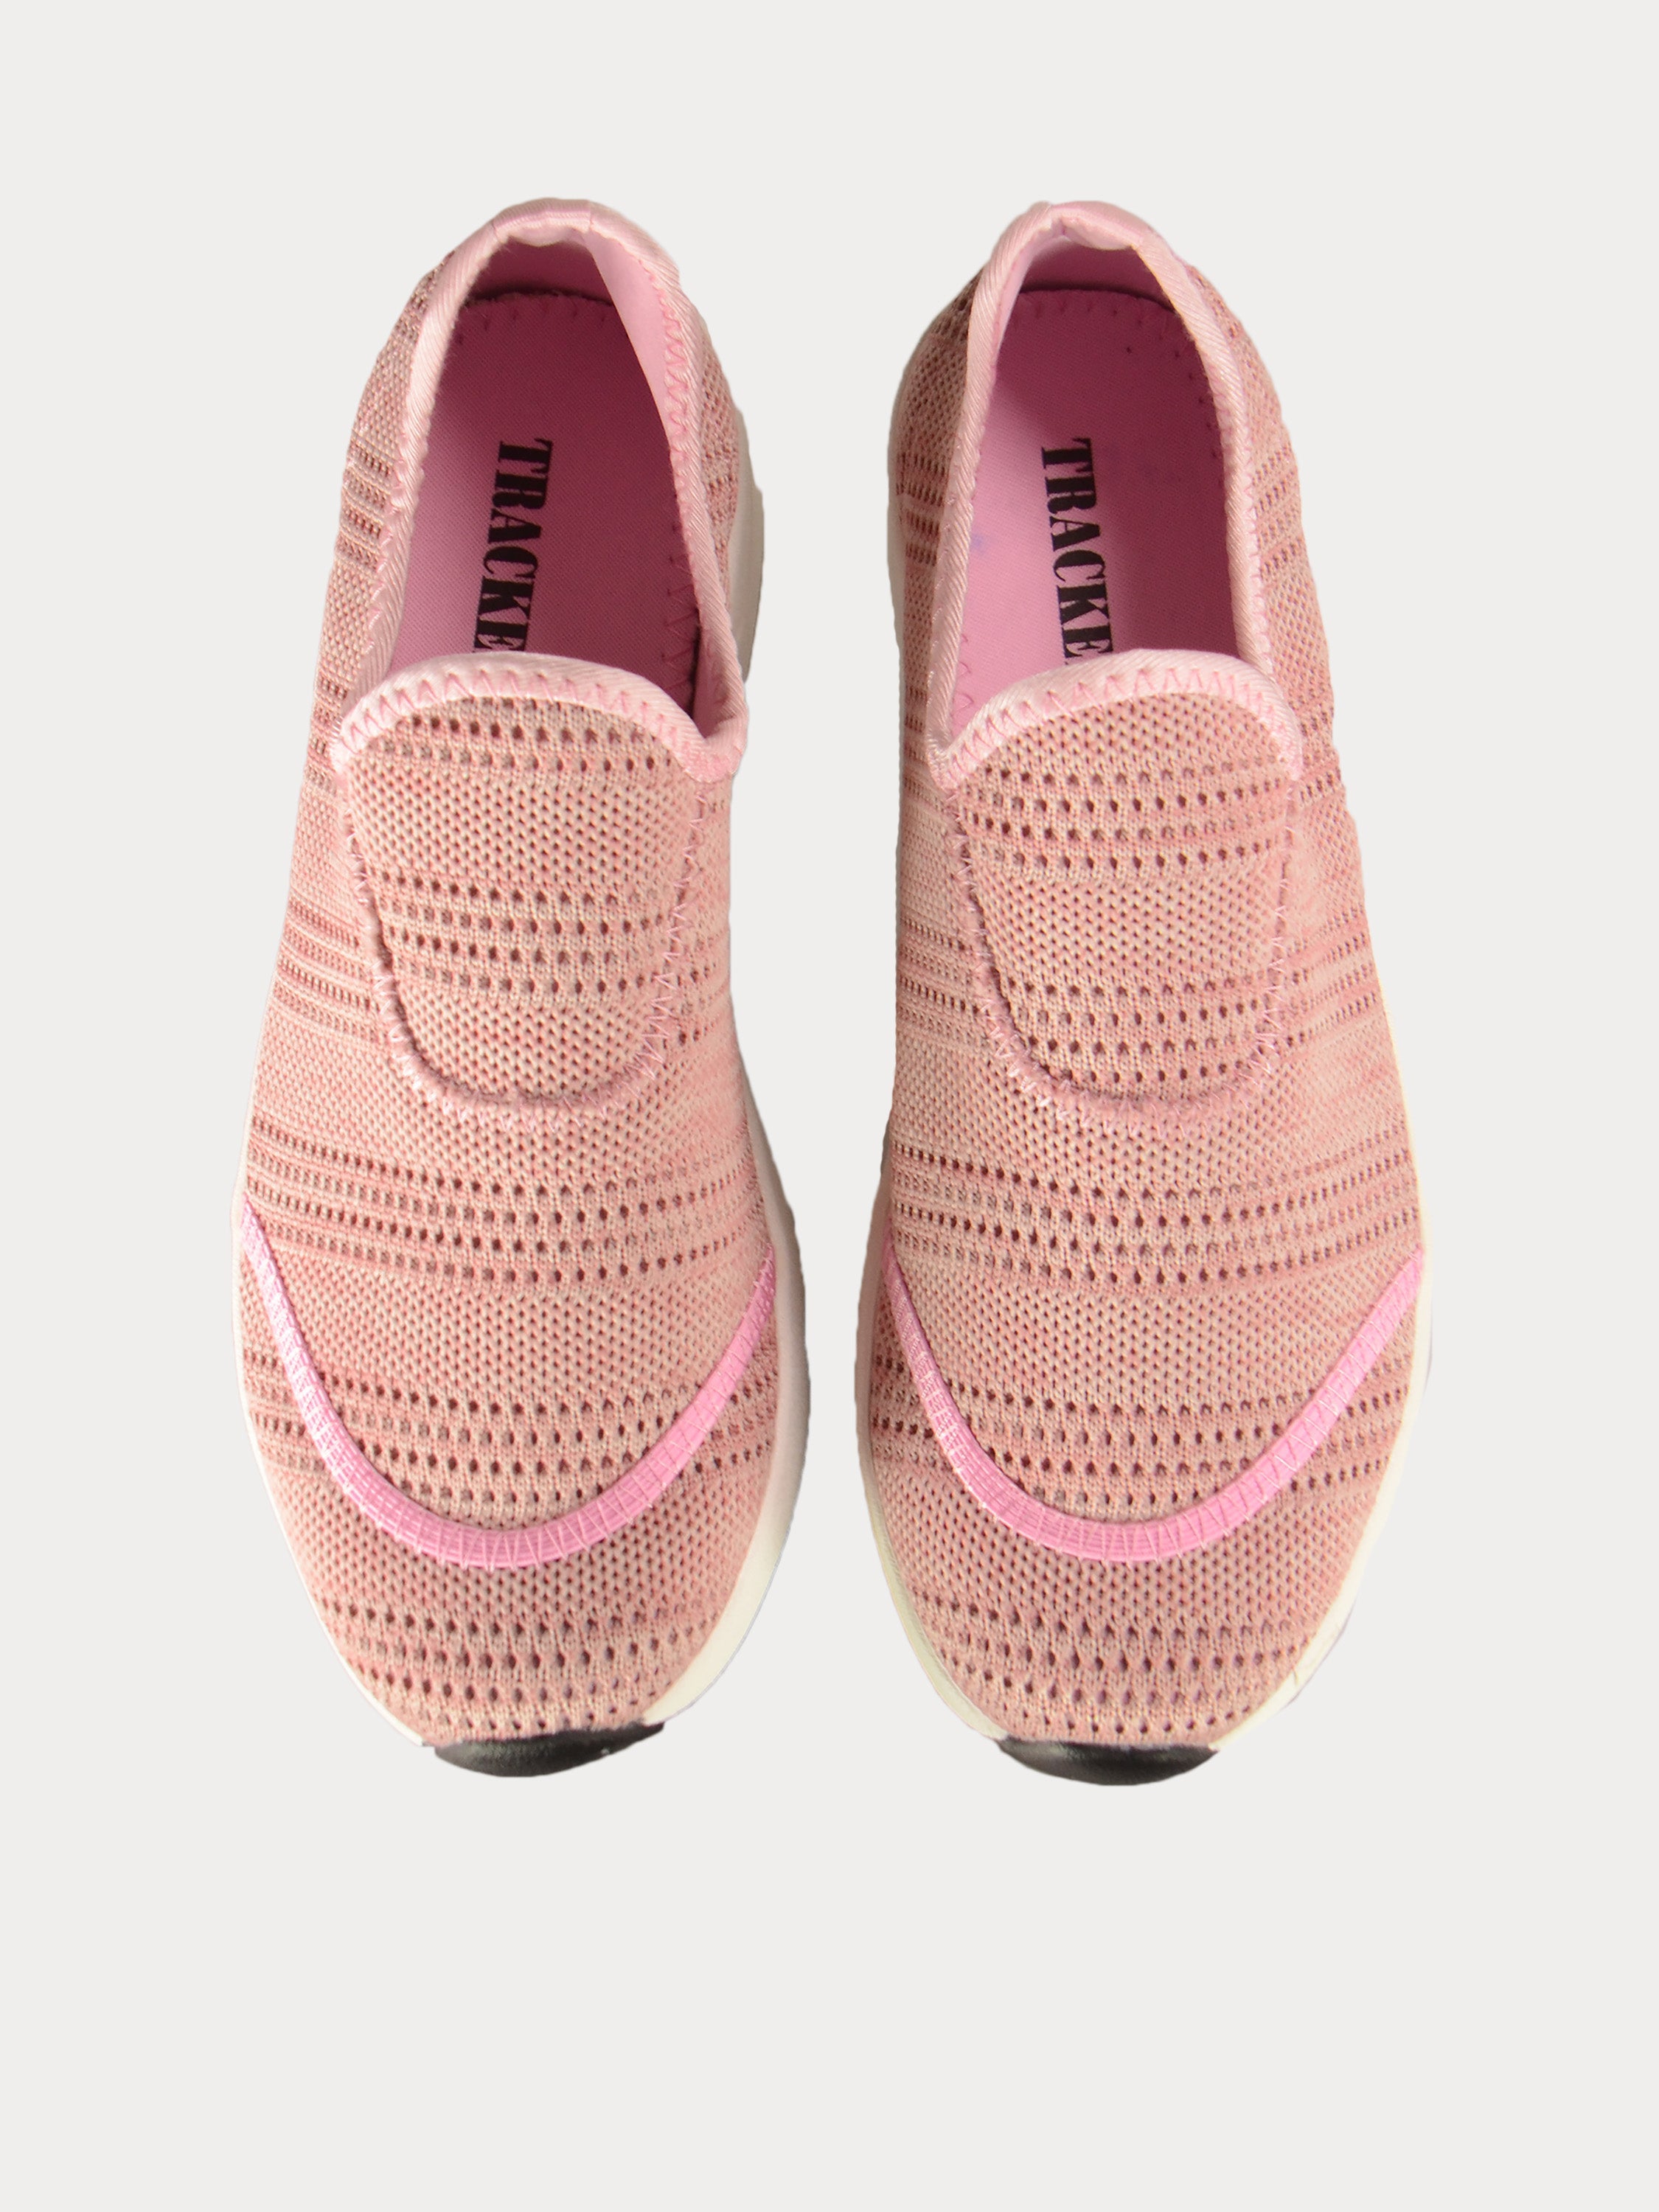 Tracker Women Slip On Trainers #color_Pink